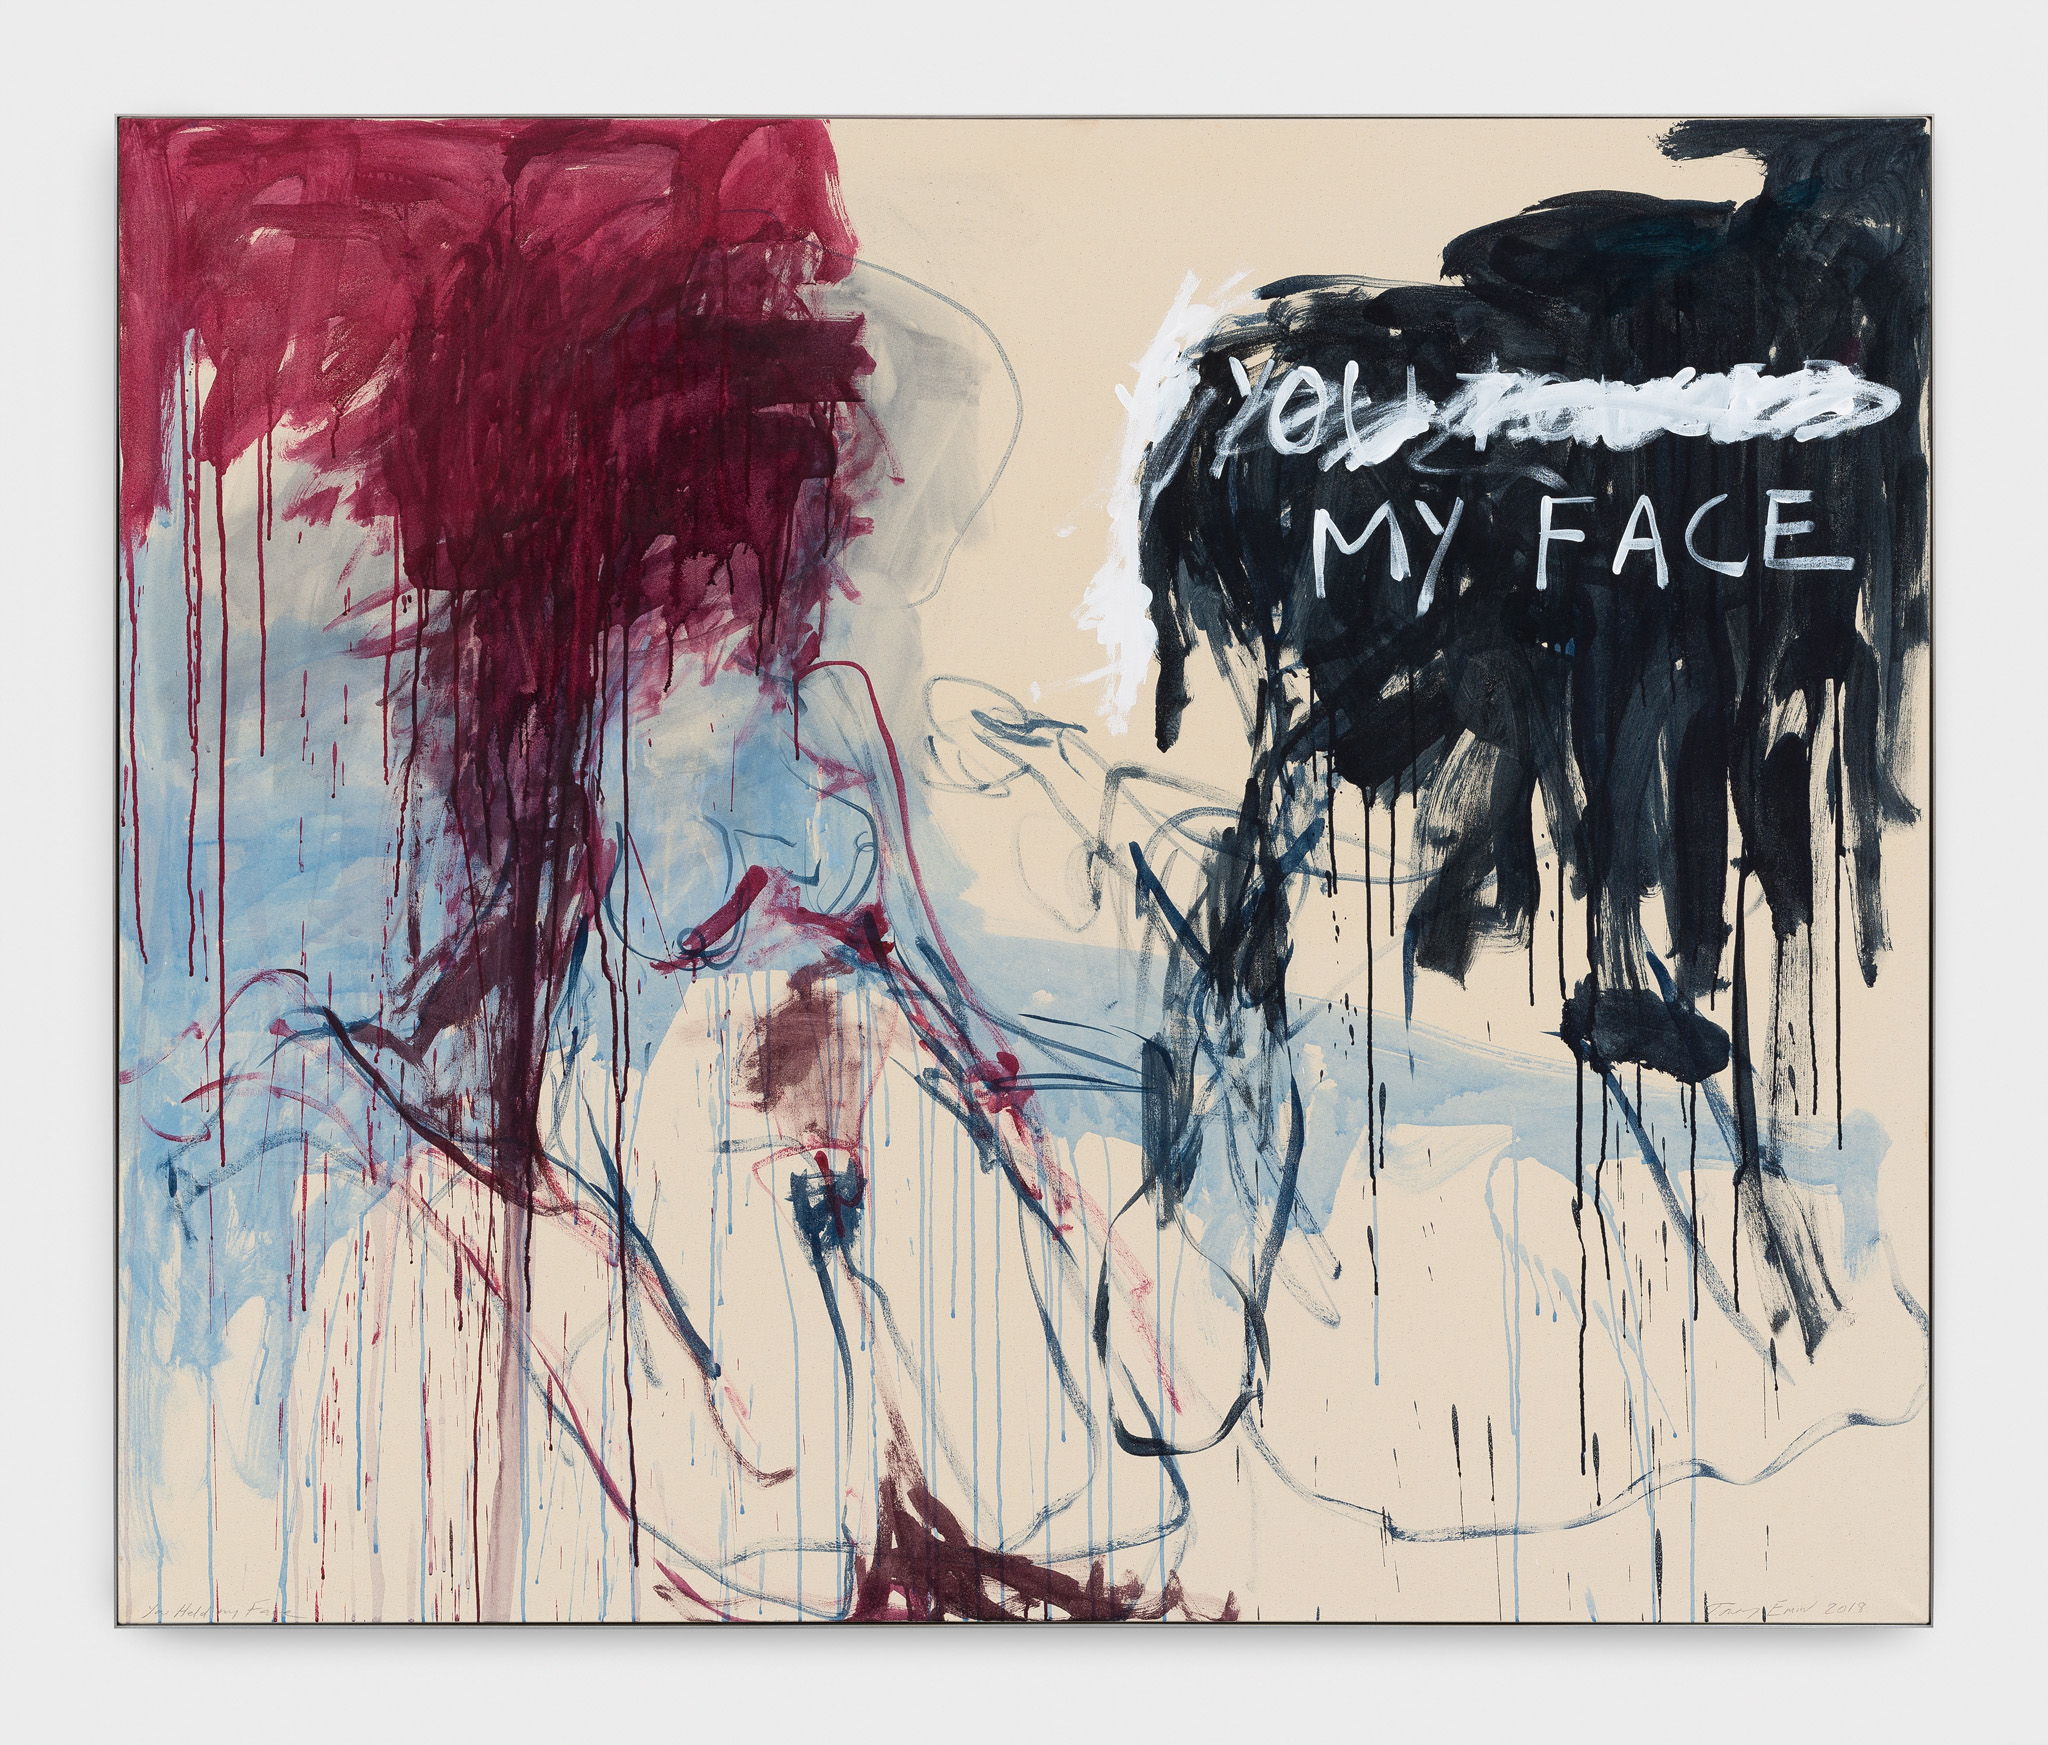 Tracey Emin
, You Held my Face, 2018. Acrylic on canvas
, 152,1 x 183,1 x 3,5 cm
.
Photo credit: HV-studio, Brussels
. Courtesy: the Artist and Xavier Hufkens, Brussels